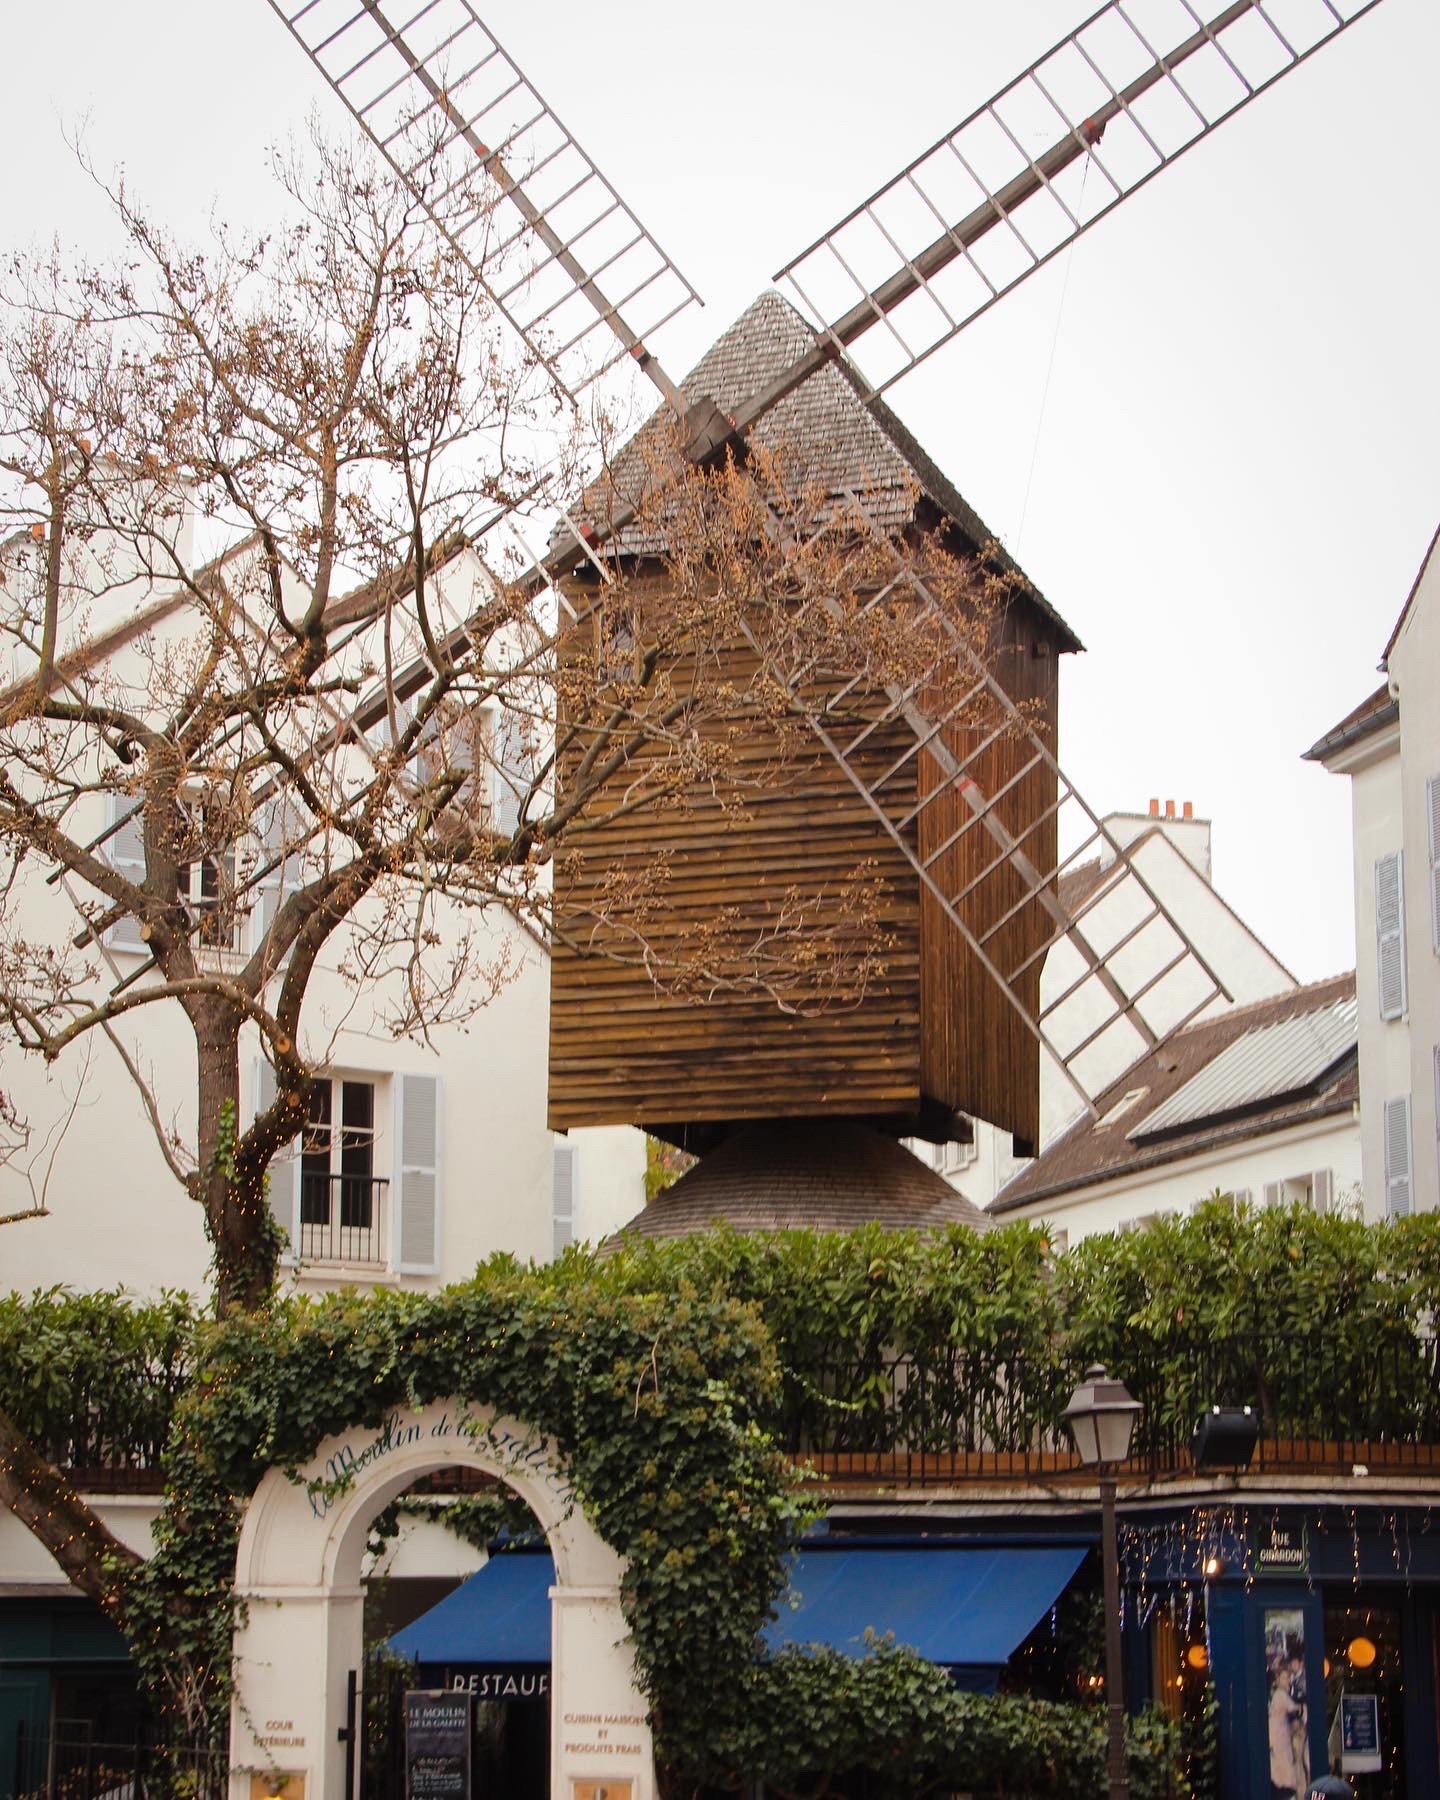 moulin in monmontre three day guide to paris.JPG